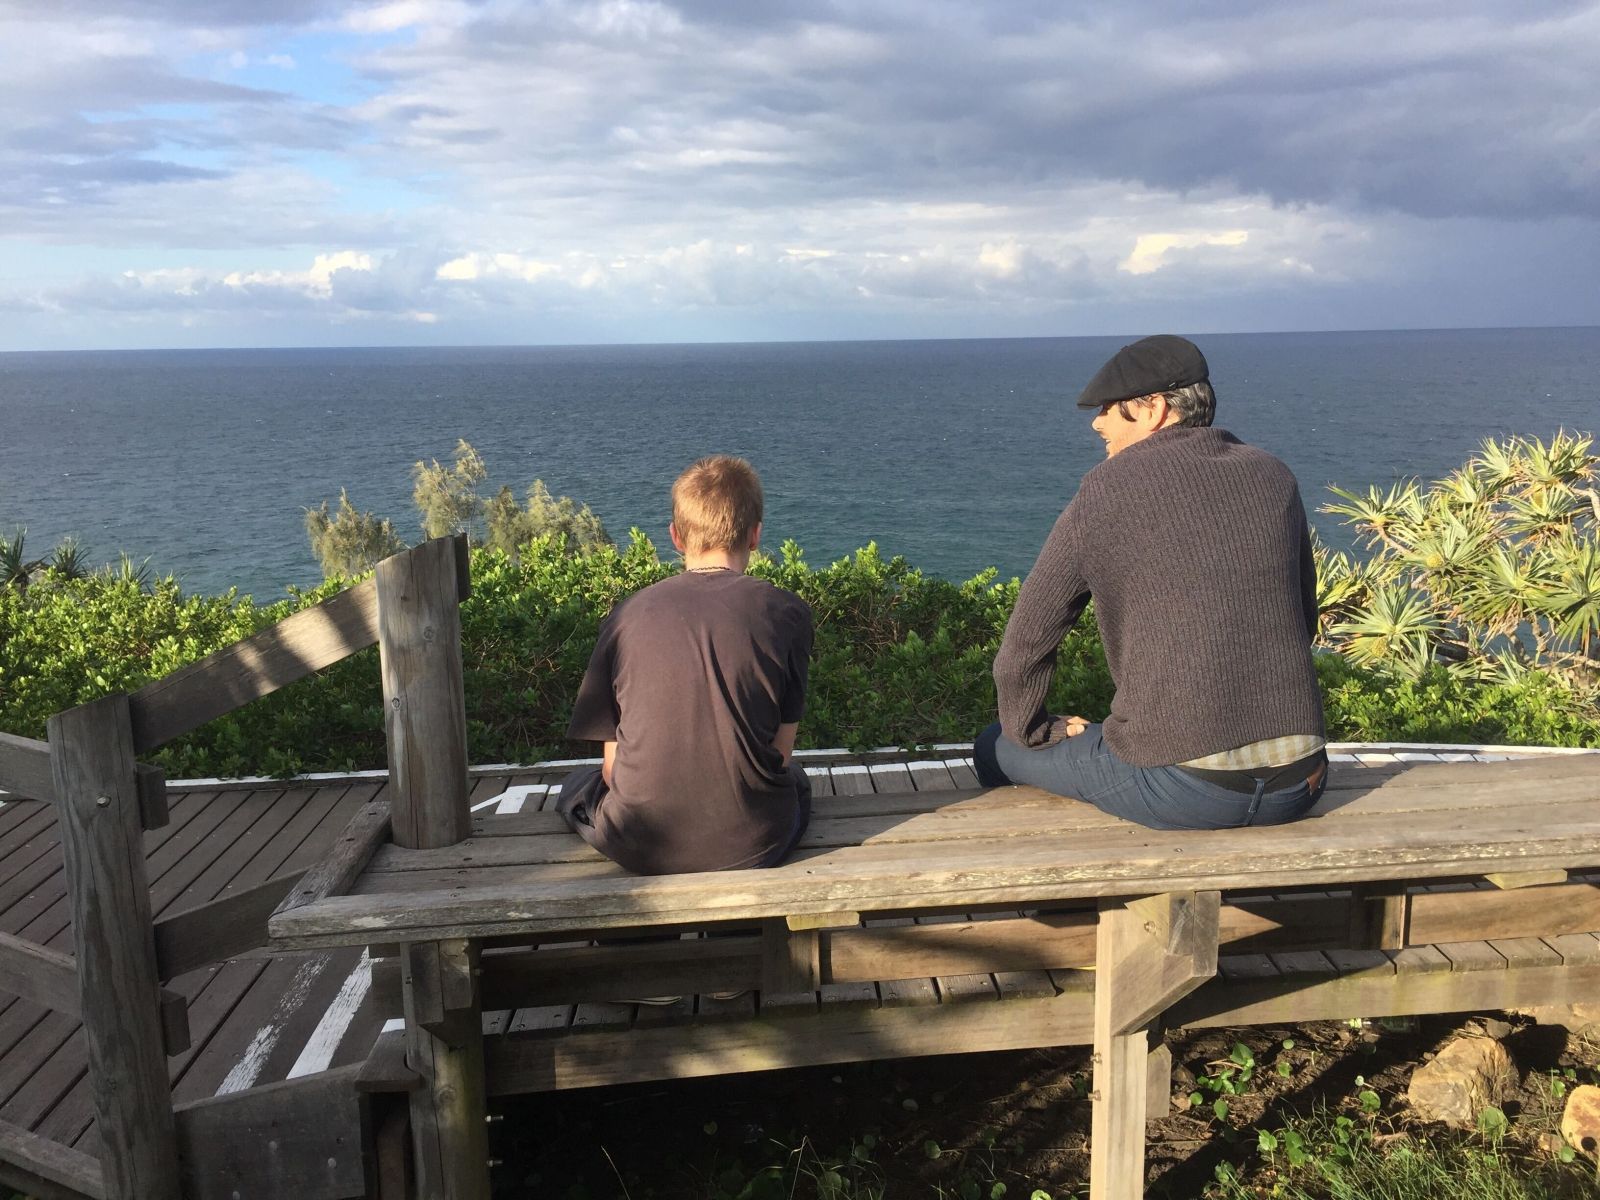 Man in his 40s speaking with a young boy on a seat by the ocean